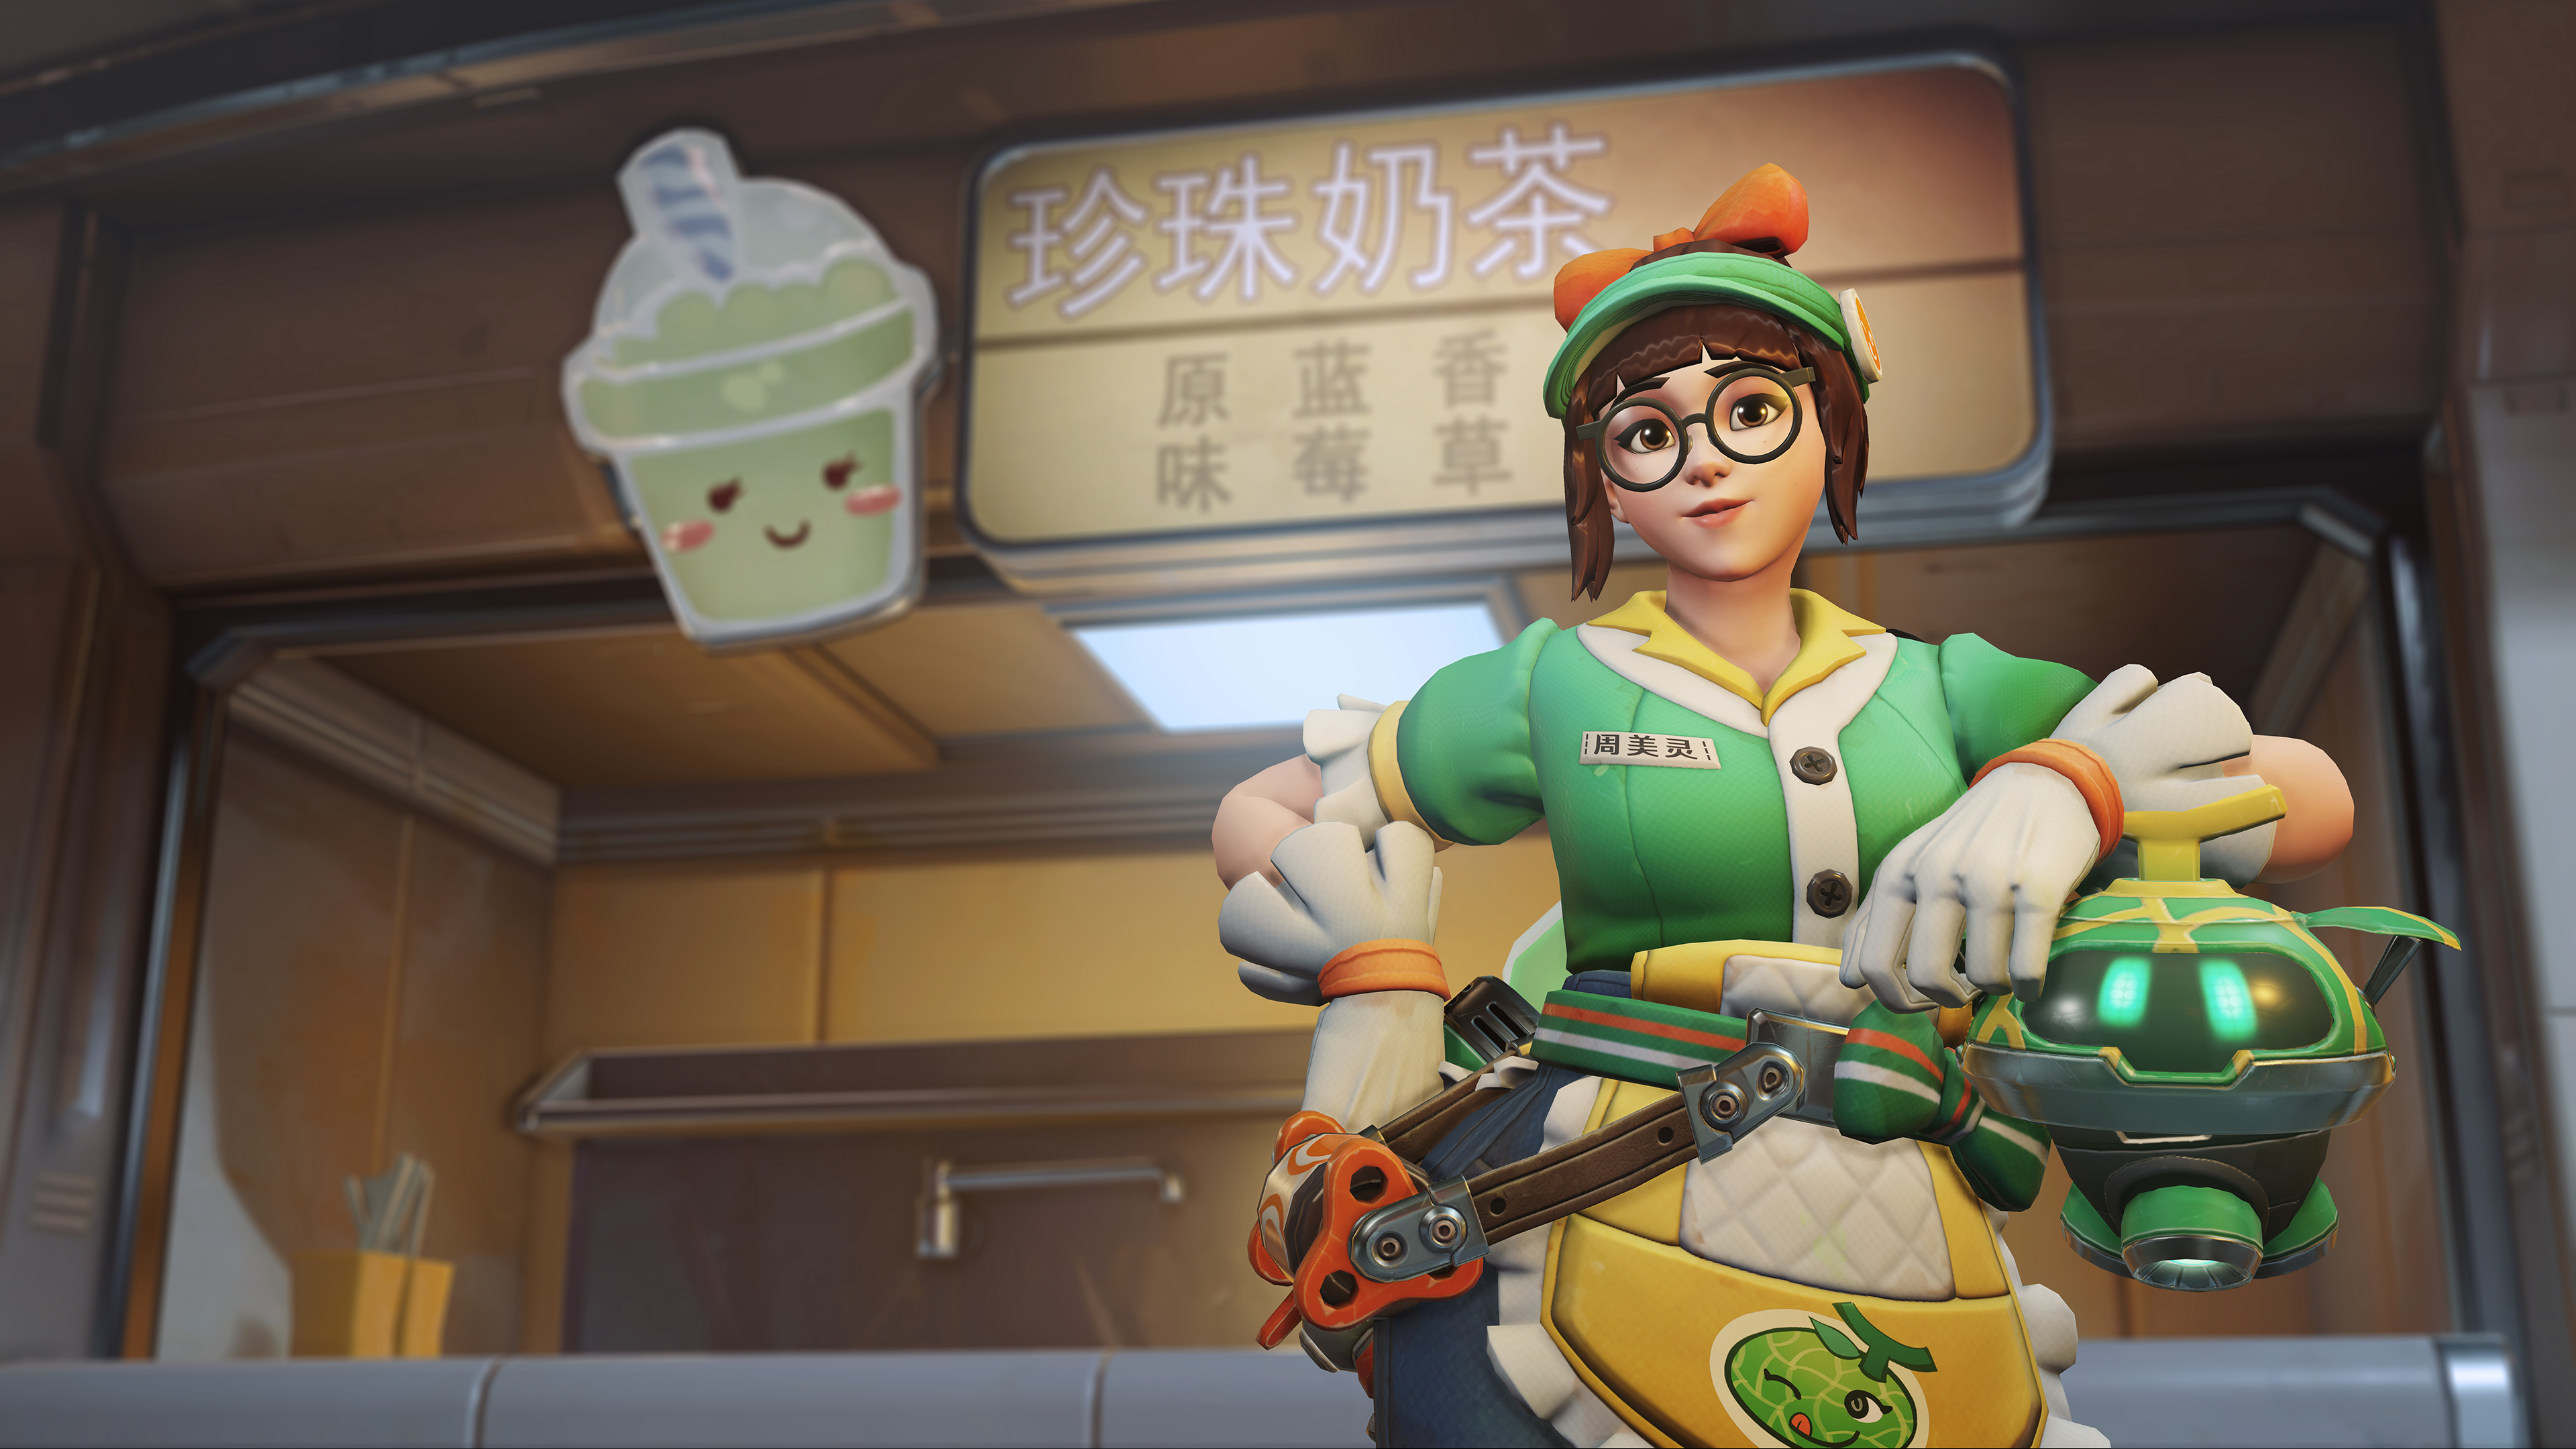 Mei Overwatch 4k Wallpaper Hd Games 4k Wallpapers Images And